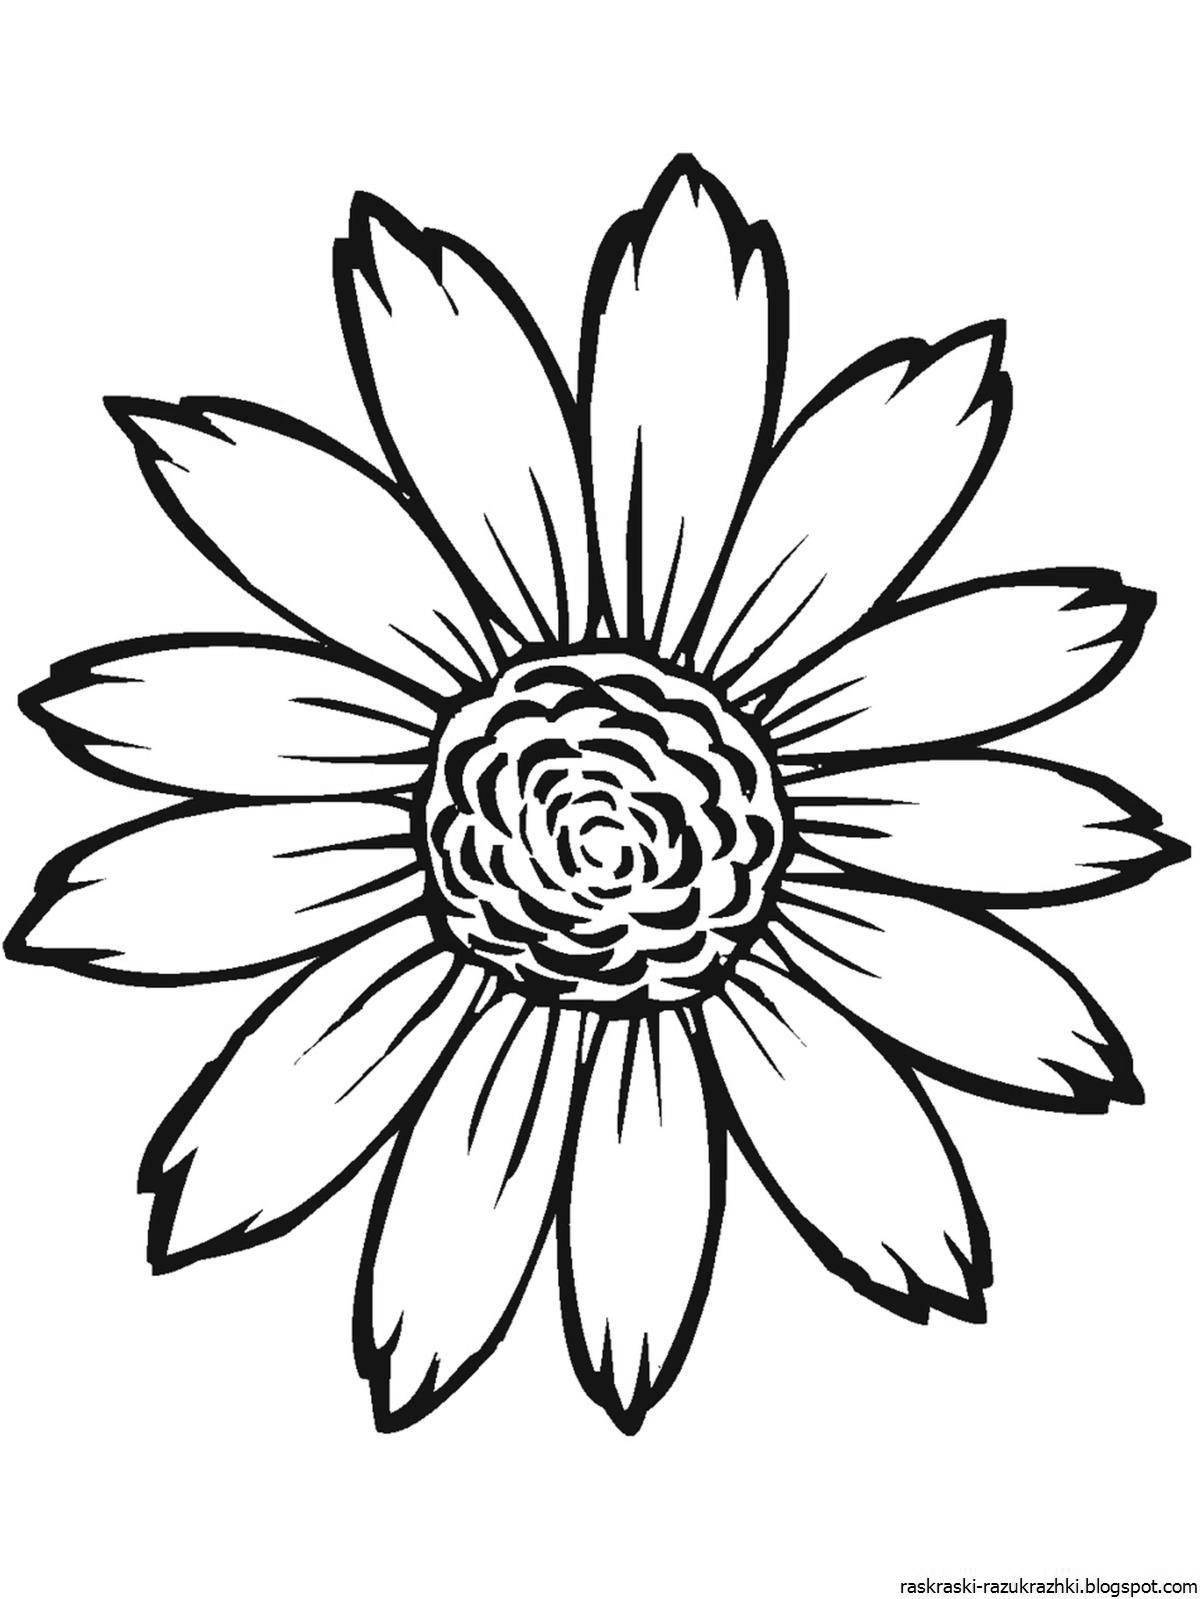 Colouring calm chamomile flowers